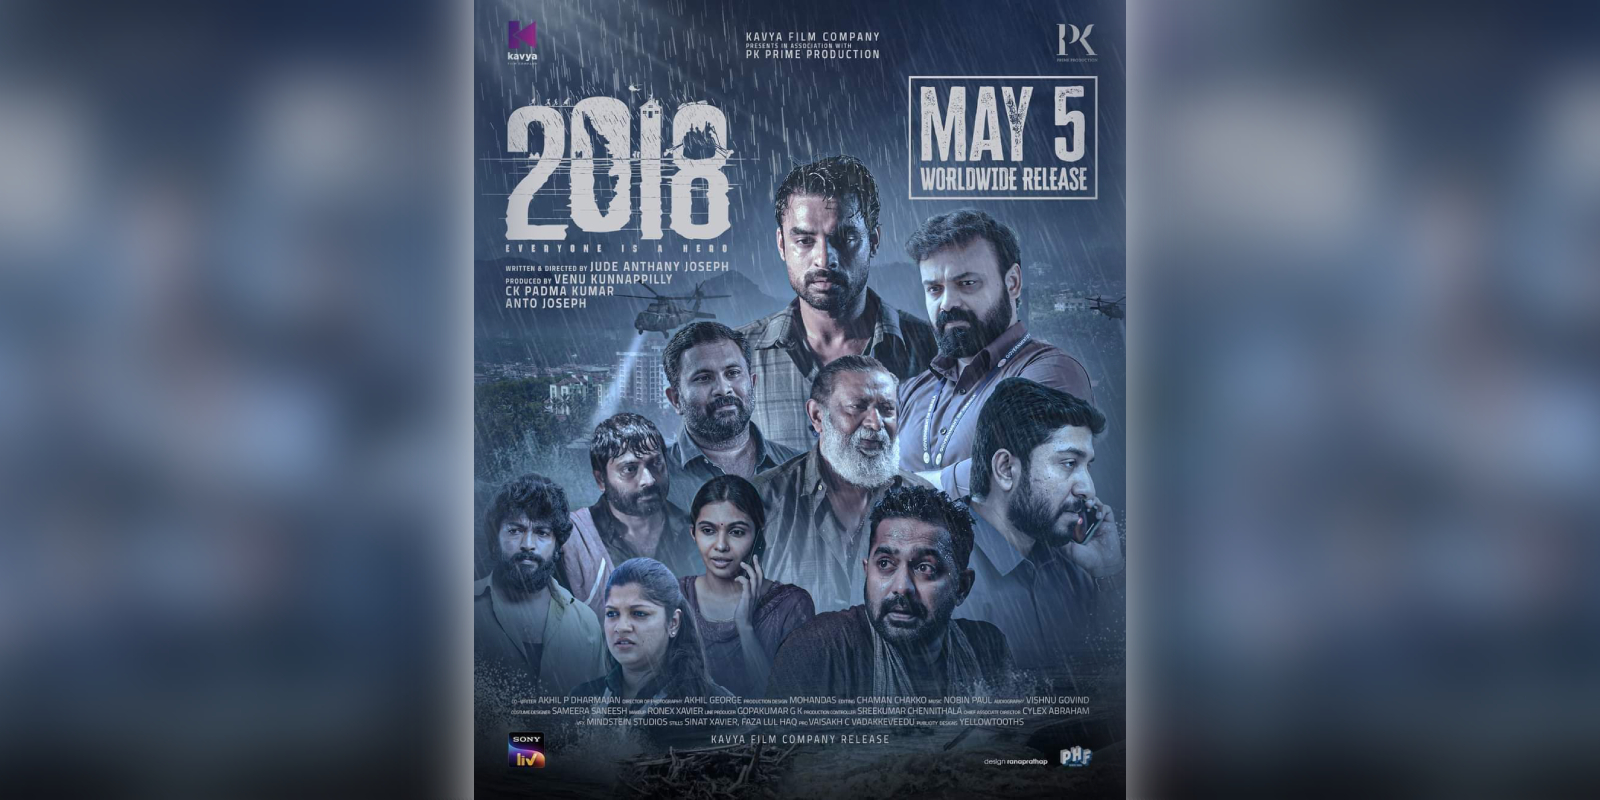 2018' Malayalam movie review - The South First